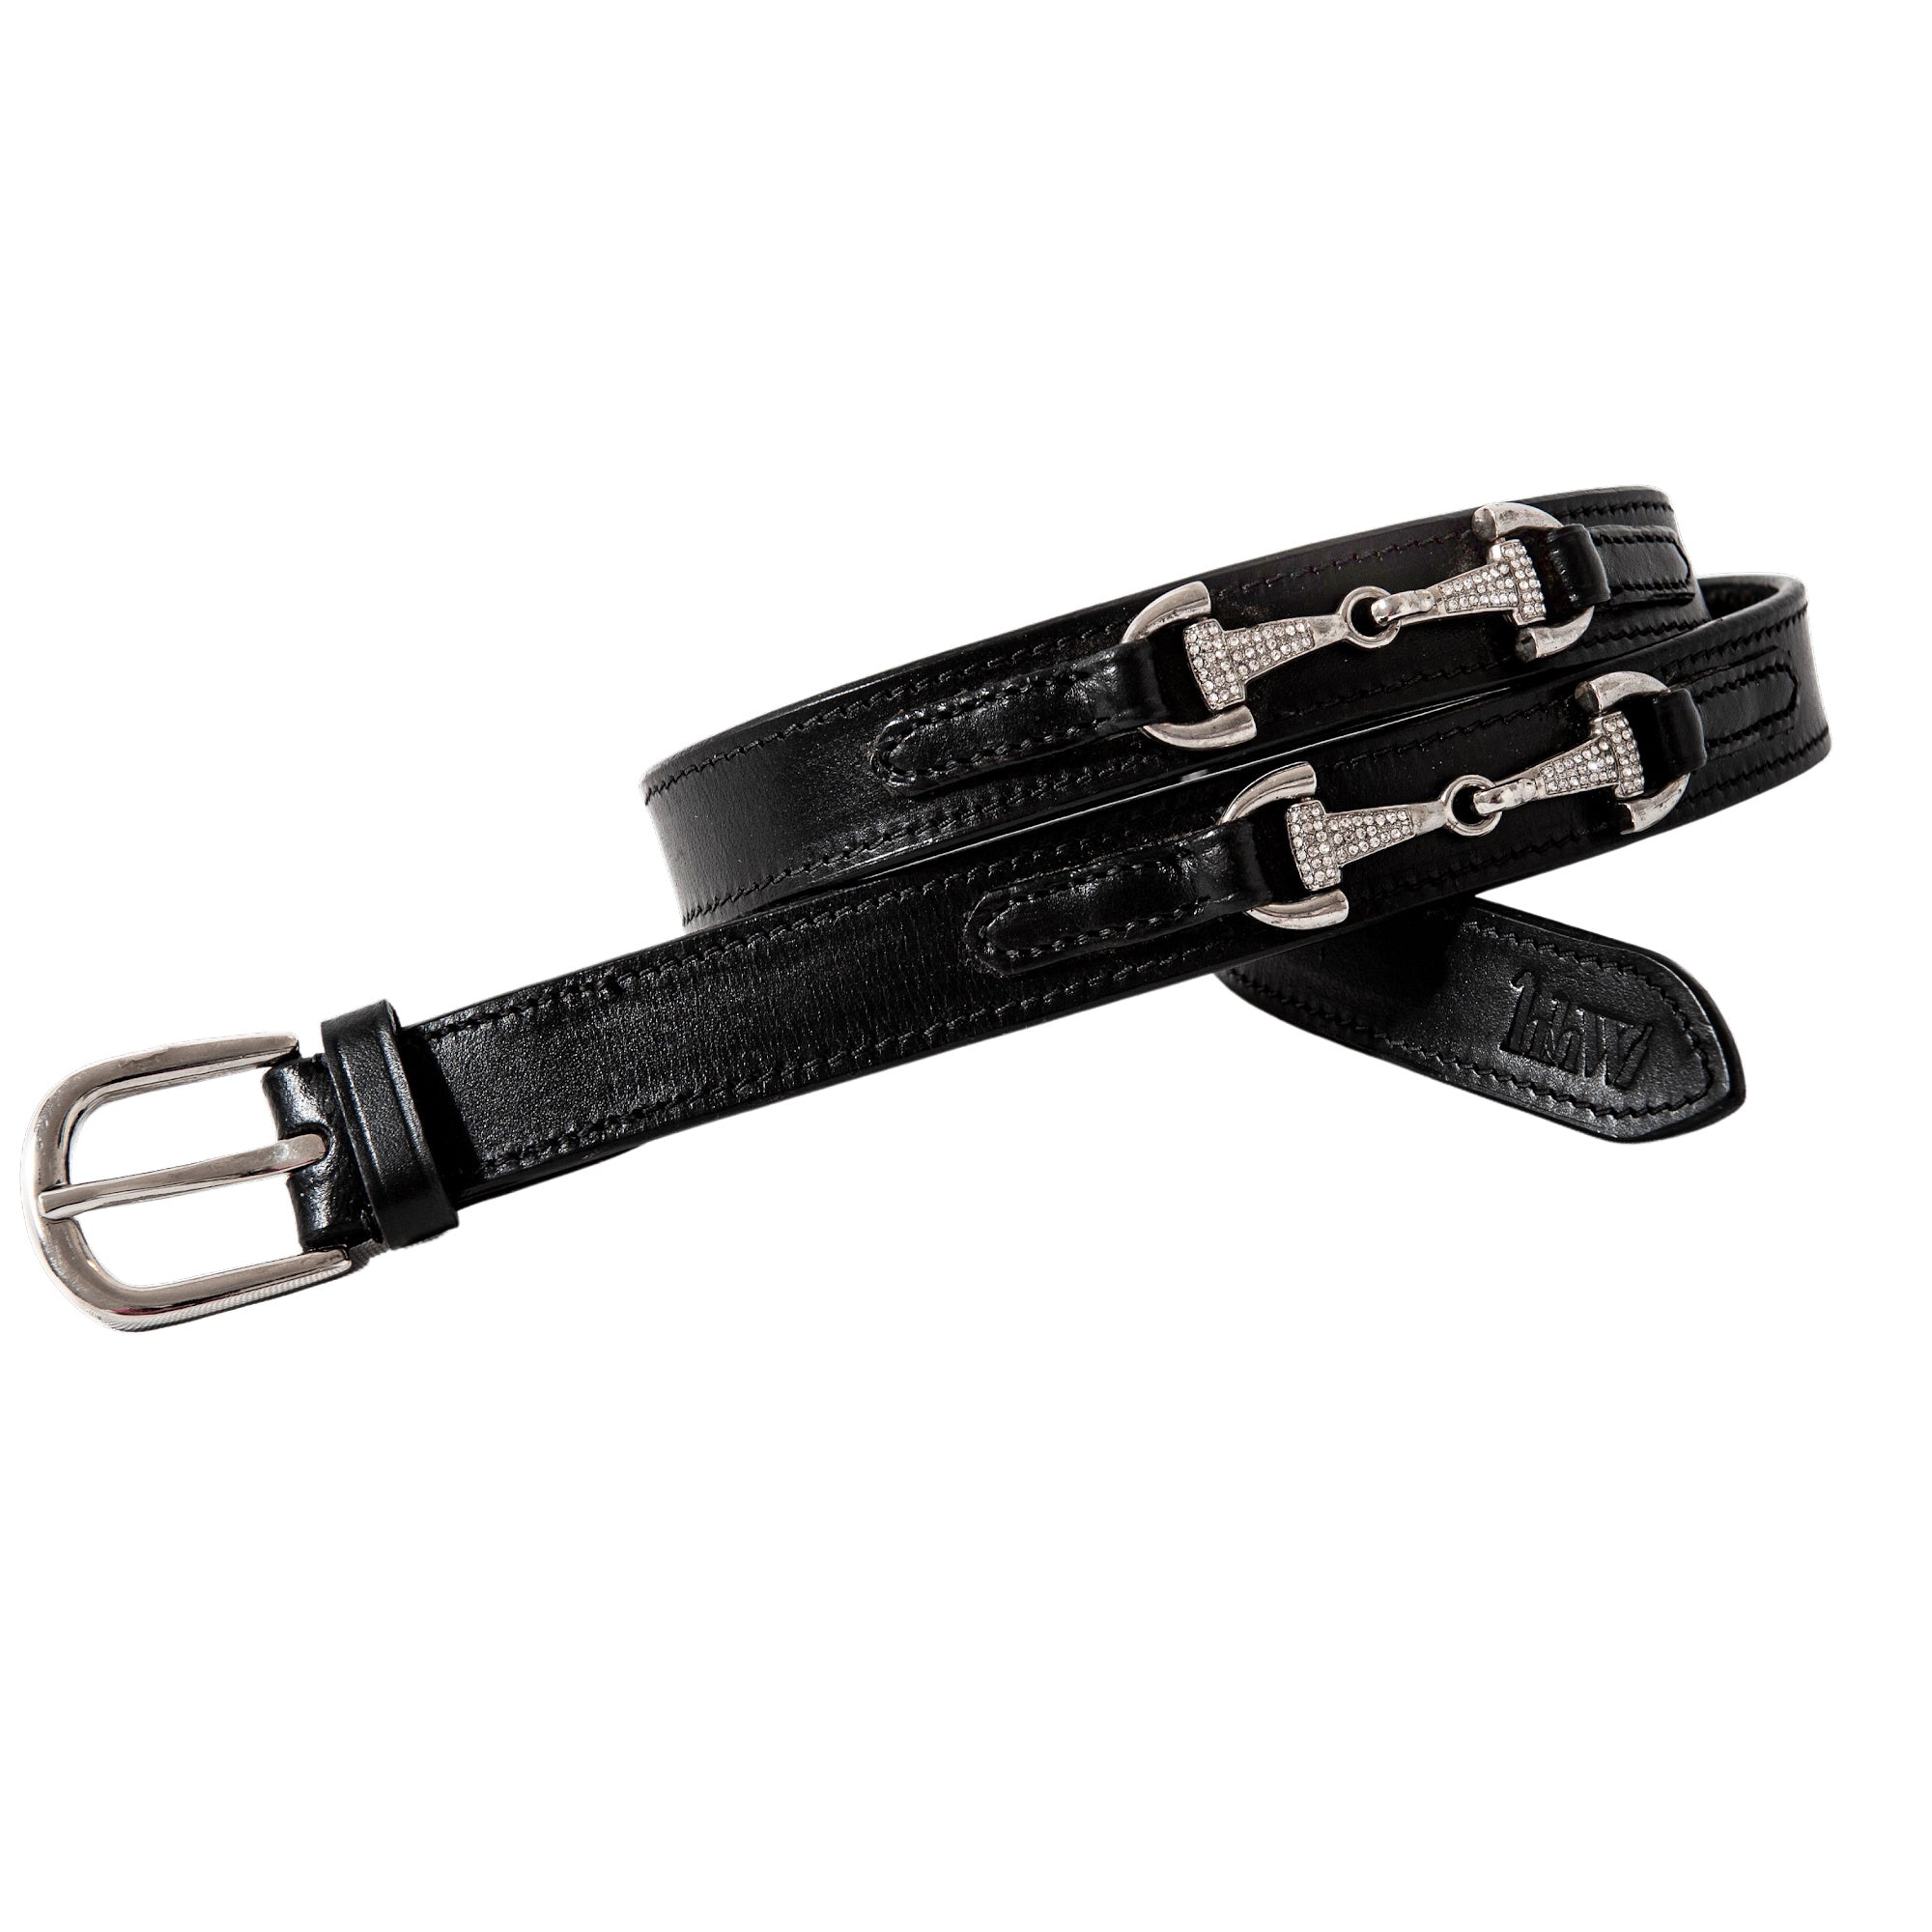 Equestrian Belt with Snaffle Horse Bit